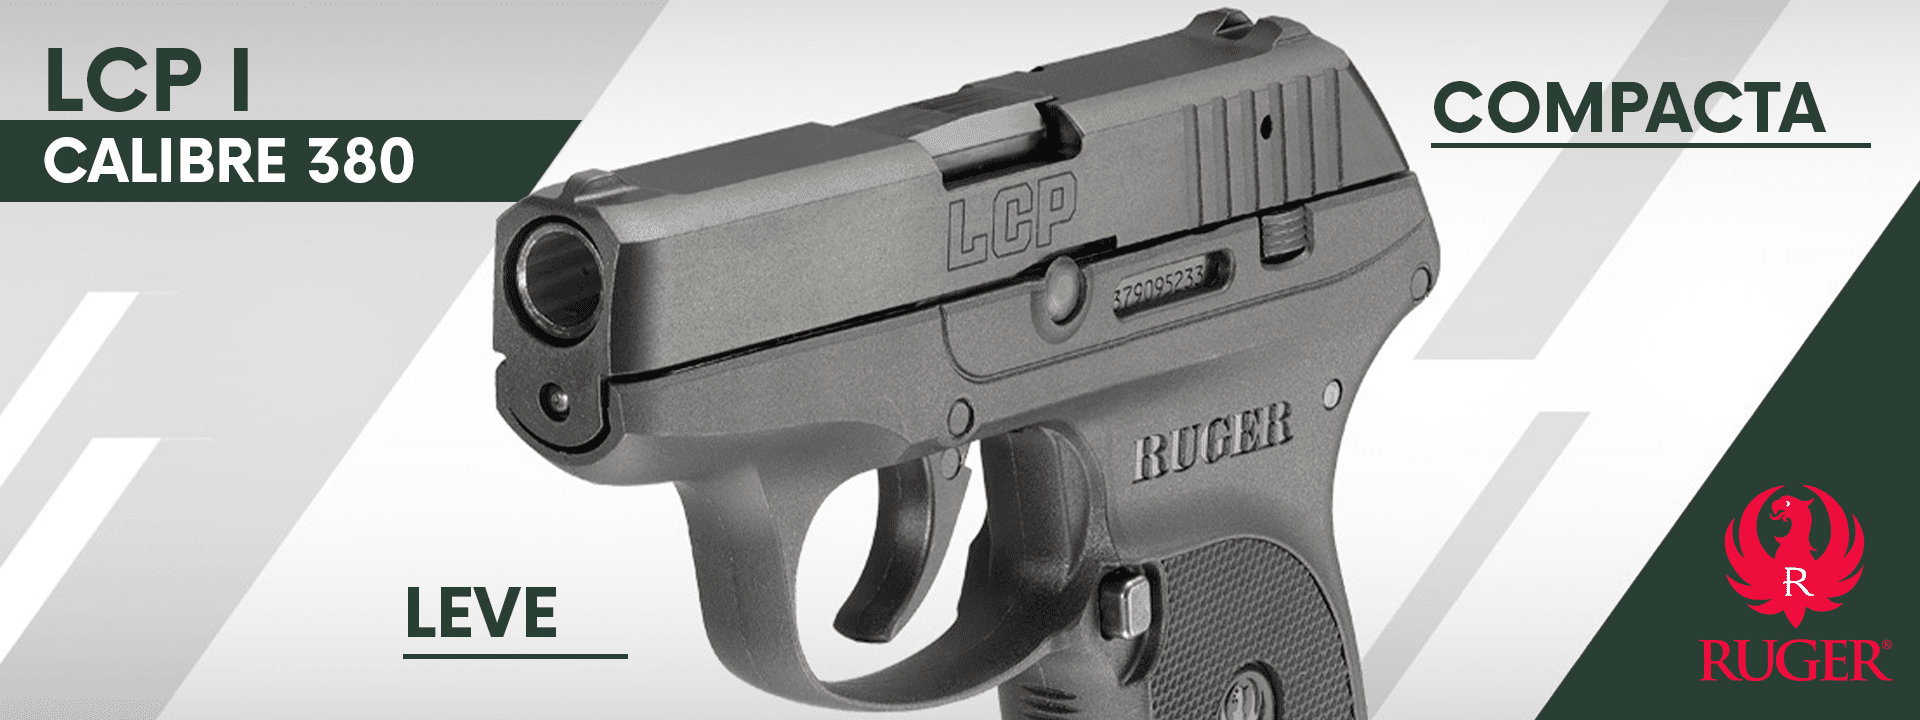 banner-ruger-lcp